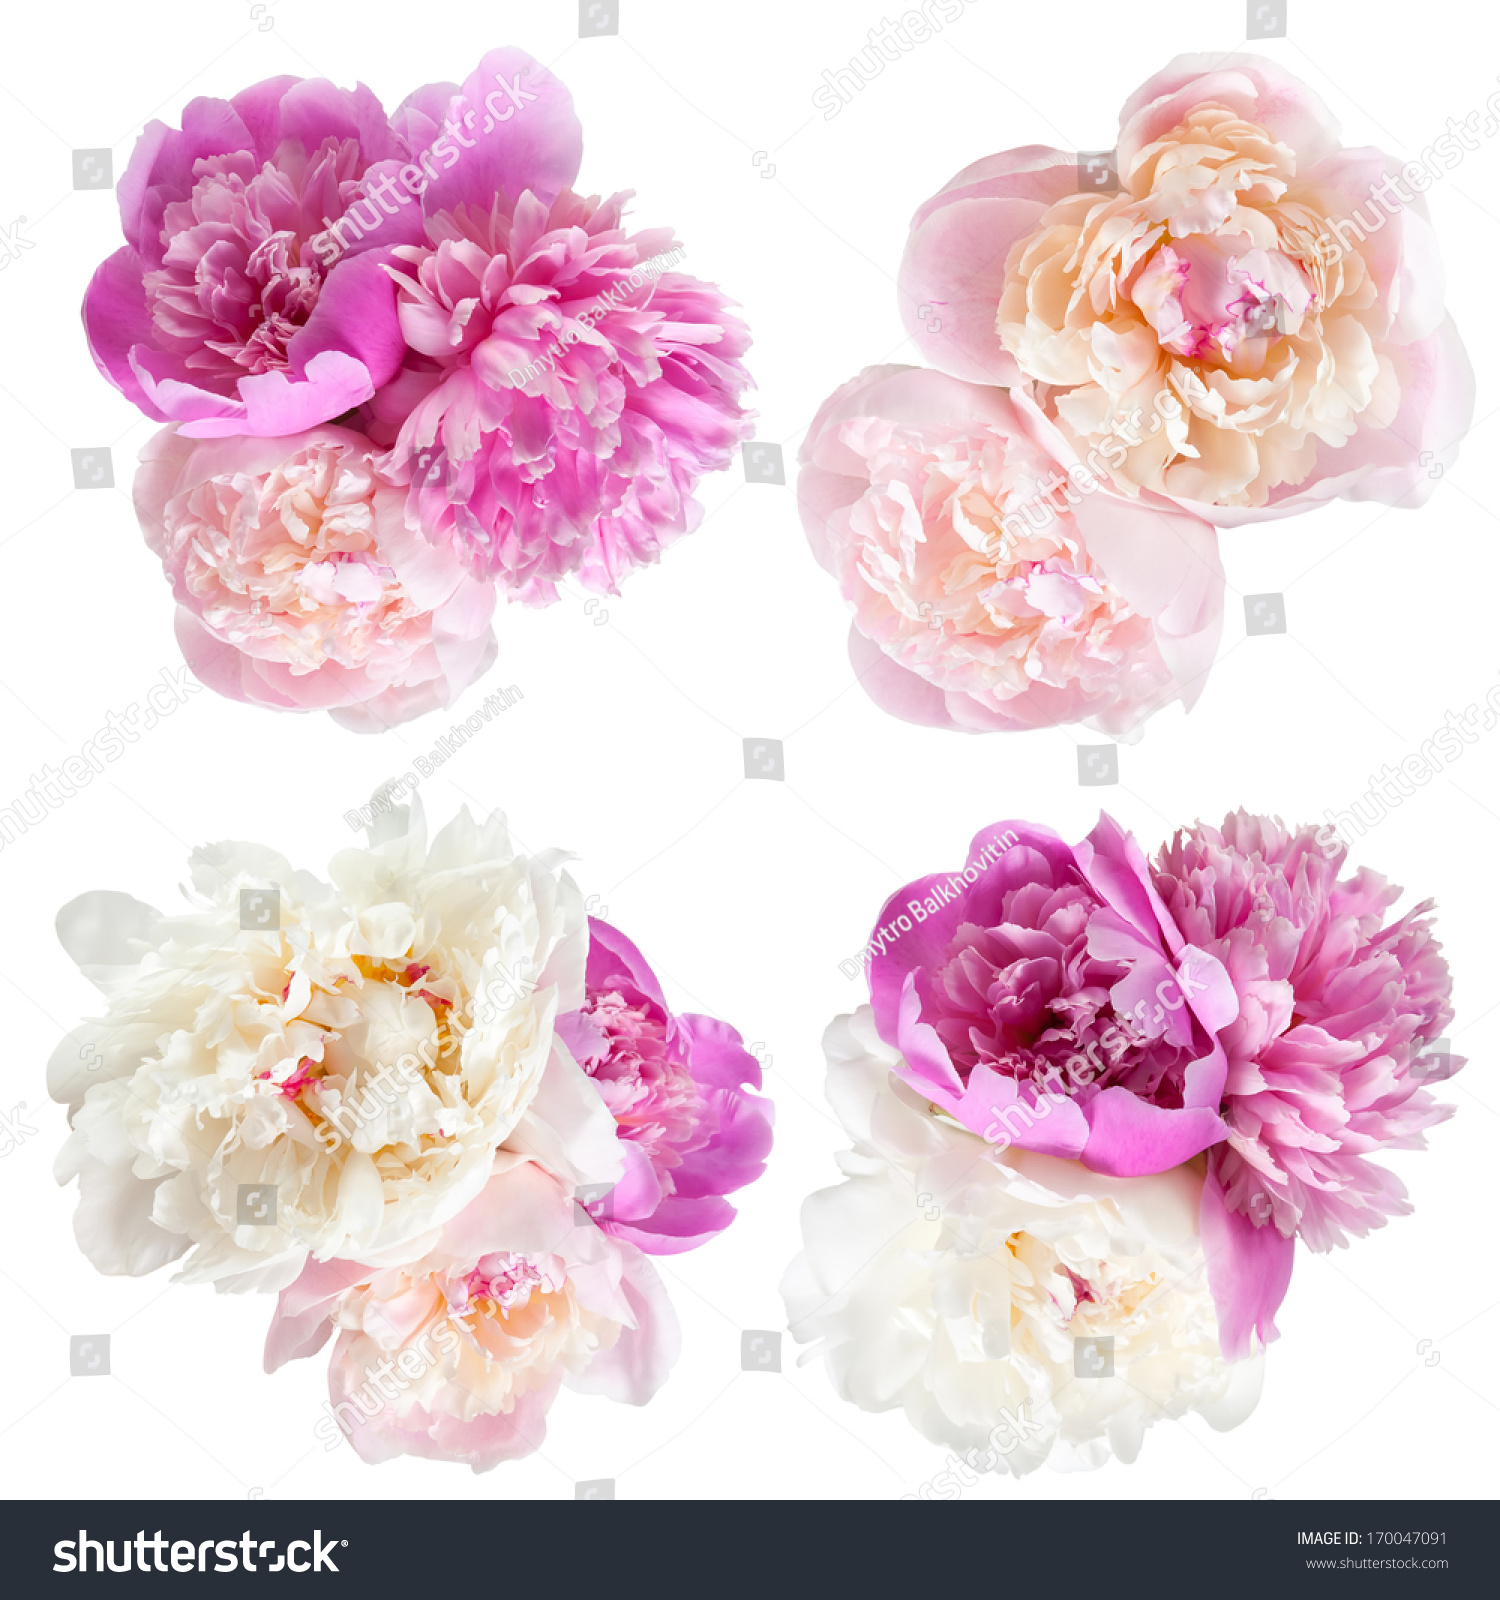 Peonies flower isolated on white background #170047091